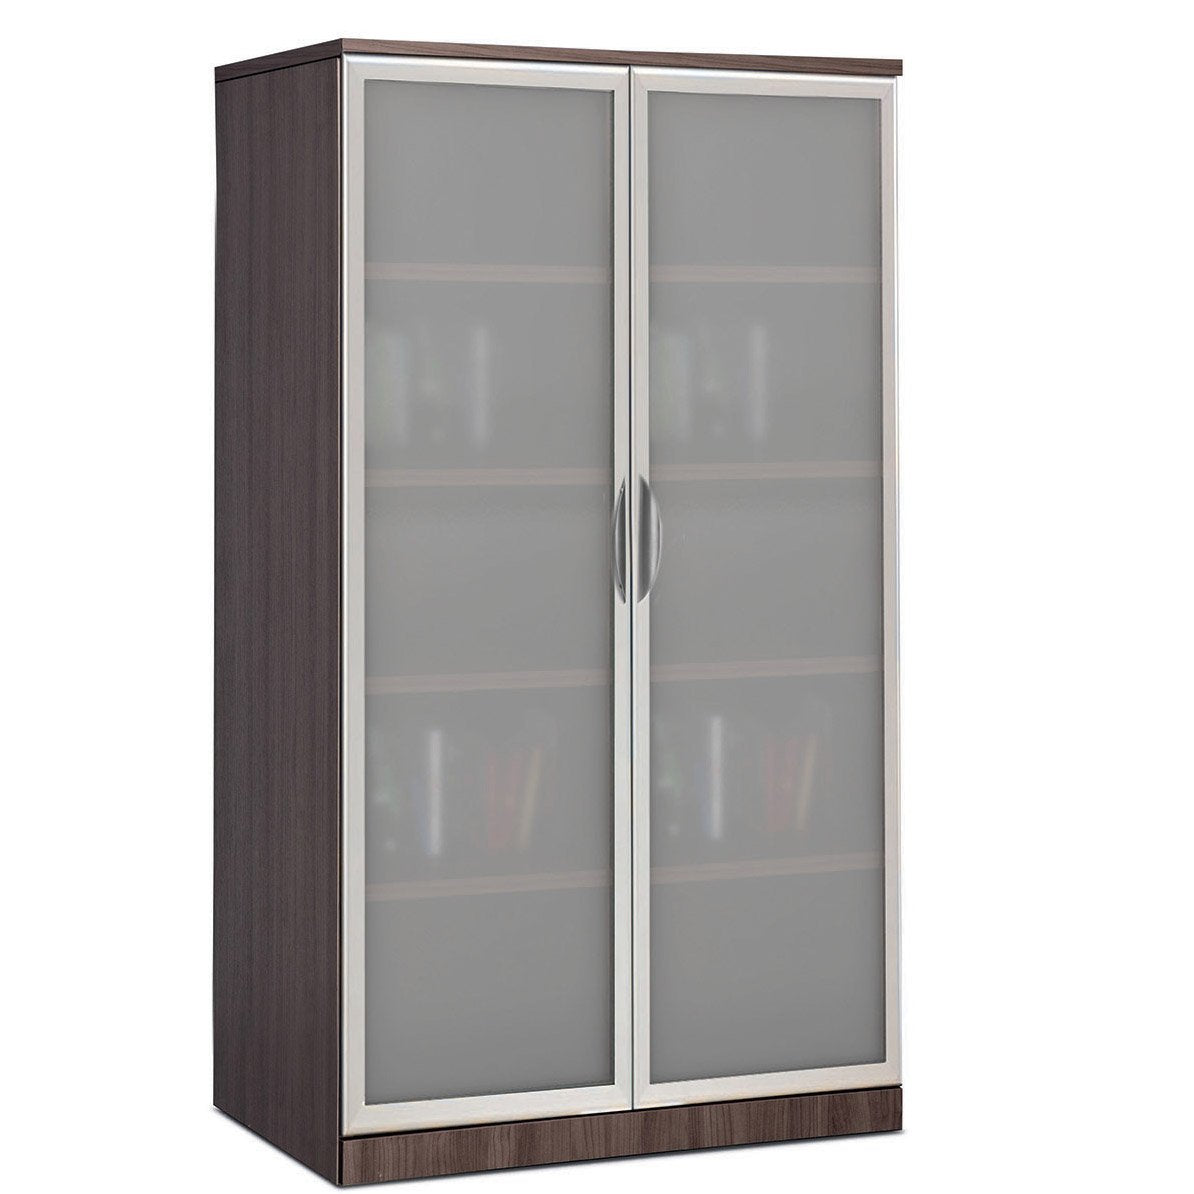 Storage cabinet with glass doors and adjustable shelves